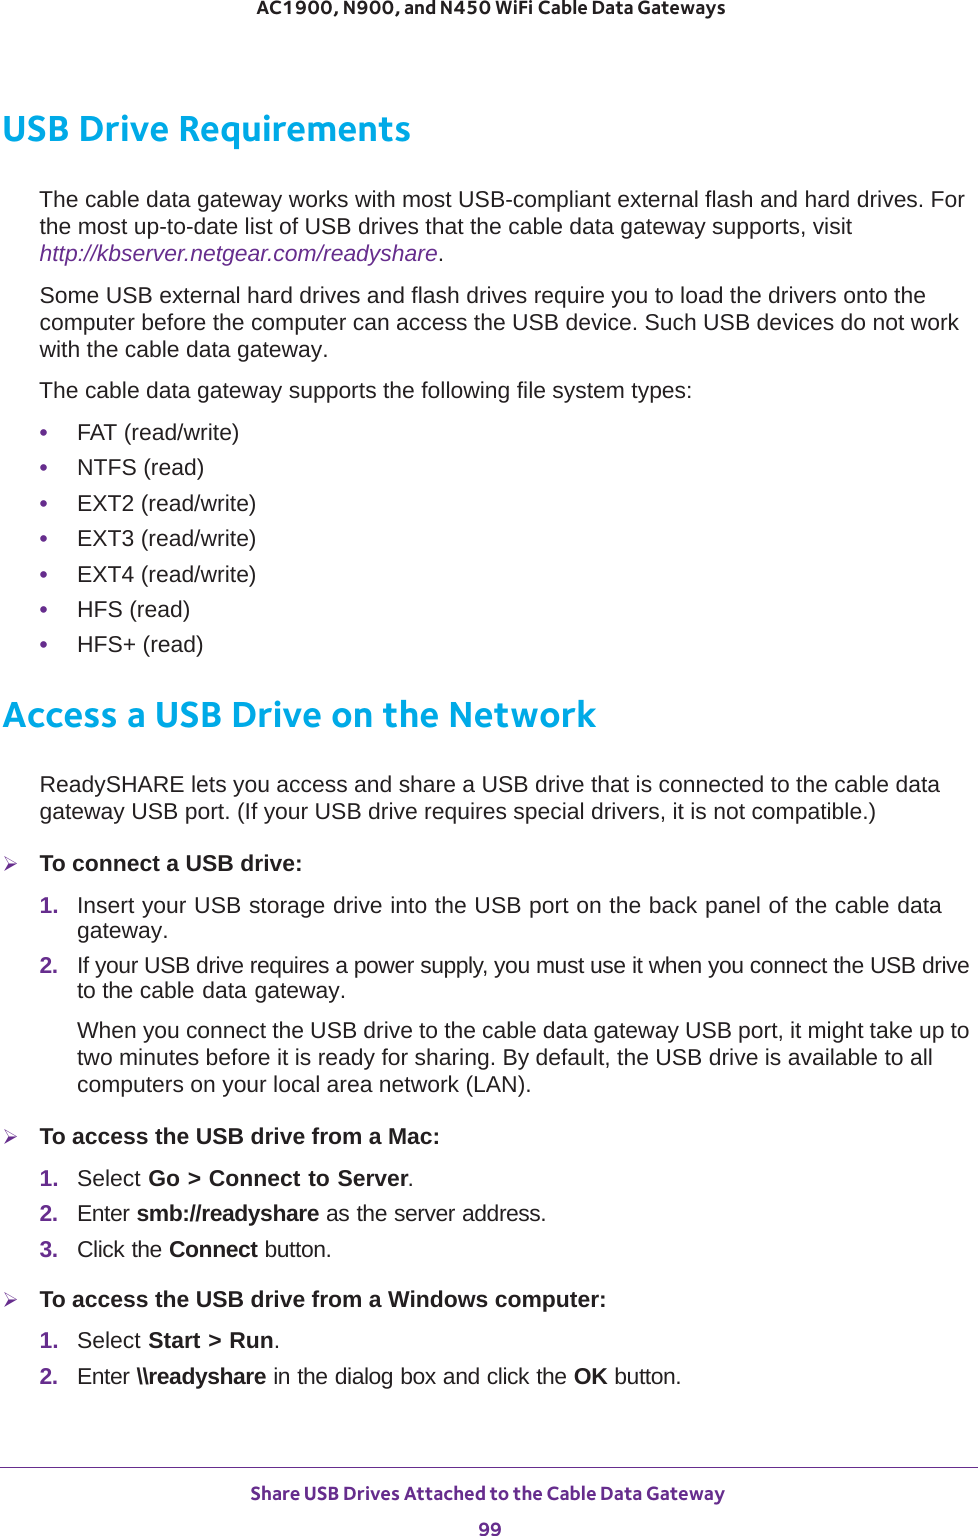 Share USB Drives Attached to the Cable Data Gateway 99 AC1900, N900, and N450 WiFi Cable Data GatewaysUSB Drive RequirementsThe cable data gateway works with most USB-compliant external flash and hard drives. For the most up-to-date list of USB drives that the cable data gateway supports, visit http://kbserver.netgear.com/readyshare.Some USB external hard drives and flash drives require you to load the drivers onto the computer before the computer can access the USB device. Such USB devices do not work with the cable data gateway.The cable data gateway supports the following file system types: •FAT (read/write)•NTFS (read)•EXT2 (read/write)•EXT3 (read/write)•EXT4 (read/write)•HFS (read)•HFS+ (read)Access a USB Drive on the NetworkReadySHARE lets you access and share a USB drive that is connected to the cable data gateway USB port. (If your USB drive requires special drivers, it is not compatible.) To connect a USB drive:1.  Insert your USB storage drive into the USB port on the back panel of the cable data gateway.2.  If your USB drive requires a power supply, you must use it when you connect the USB drive to the cable data gateway.When you connect the USB drive to the cable data gateway USB port, it might take up to two minutes before it is ready for sharing. By default, the USB drive is available to all computers on your local area network (LAN).To access the USB drive from a Mac: 1.  Select Go &gt; Connect to Server.2.  Enter smb://readyshare as the server address.3.  Click the Connect button.To access the USB drive from a Windows computer: 1.  Select Start &gt; Run. 2.  Enter \\readyshare in the dialog box and click the OK button.